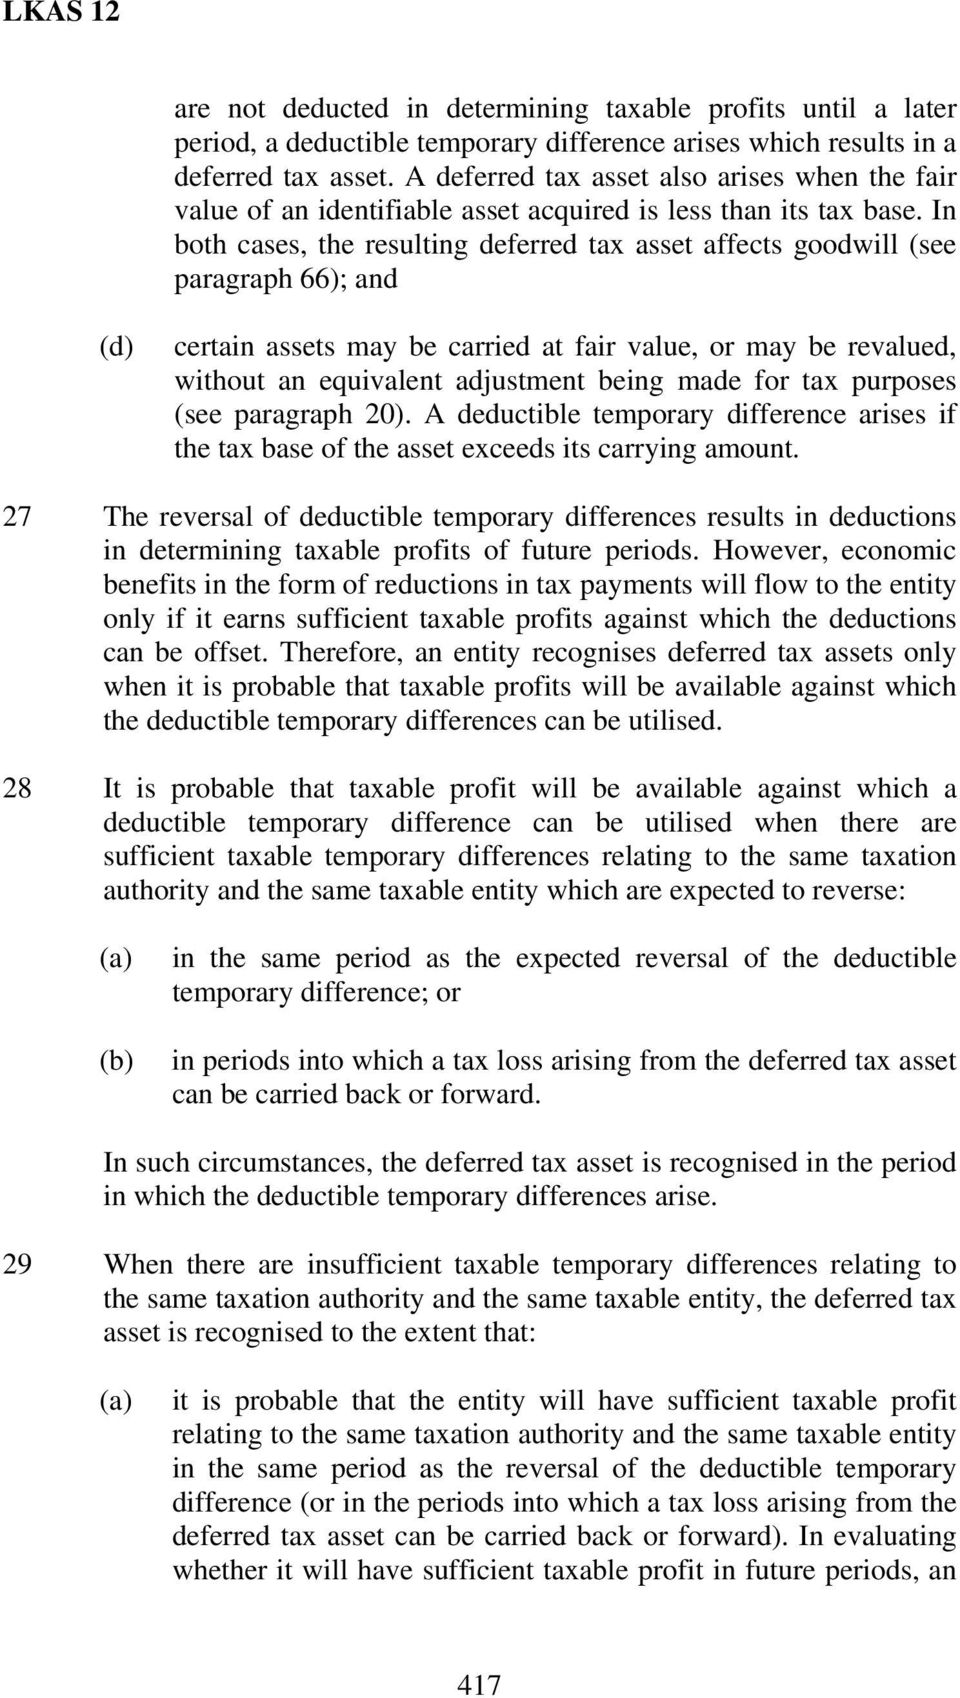 In both cases, the resulting deferred tax asset affects goodwill (see paragraph 66); and (d) certain assets may be carried at fair value, or may be revalued, without an equivalent adjustment being